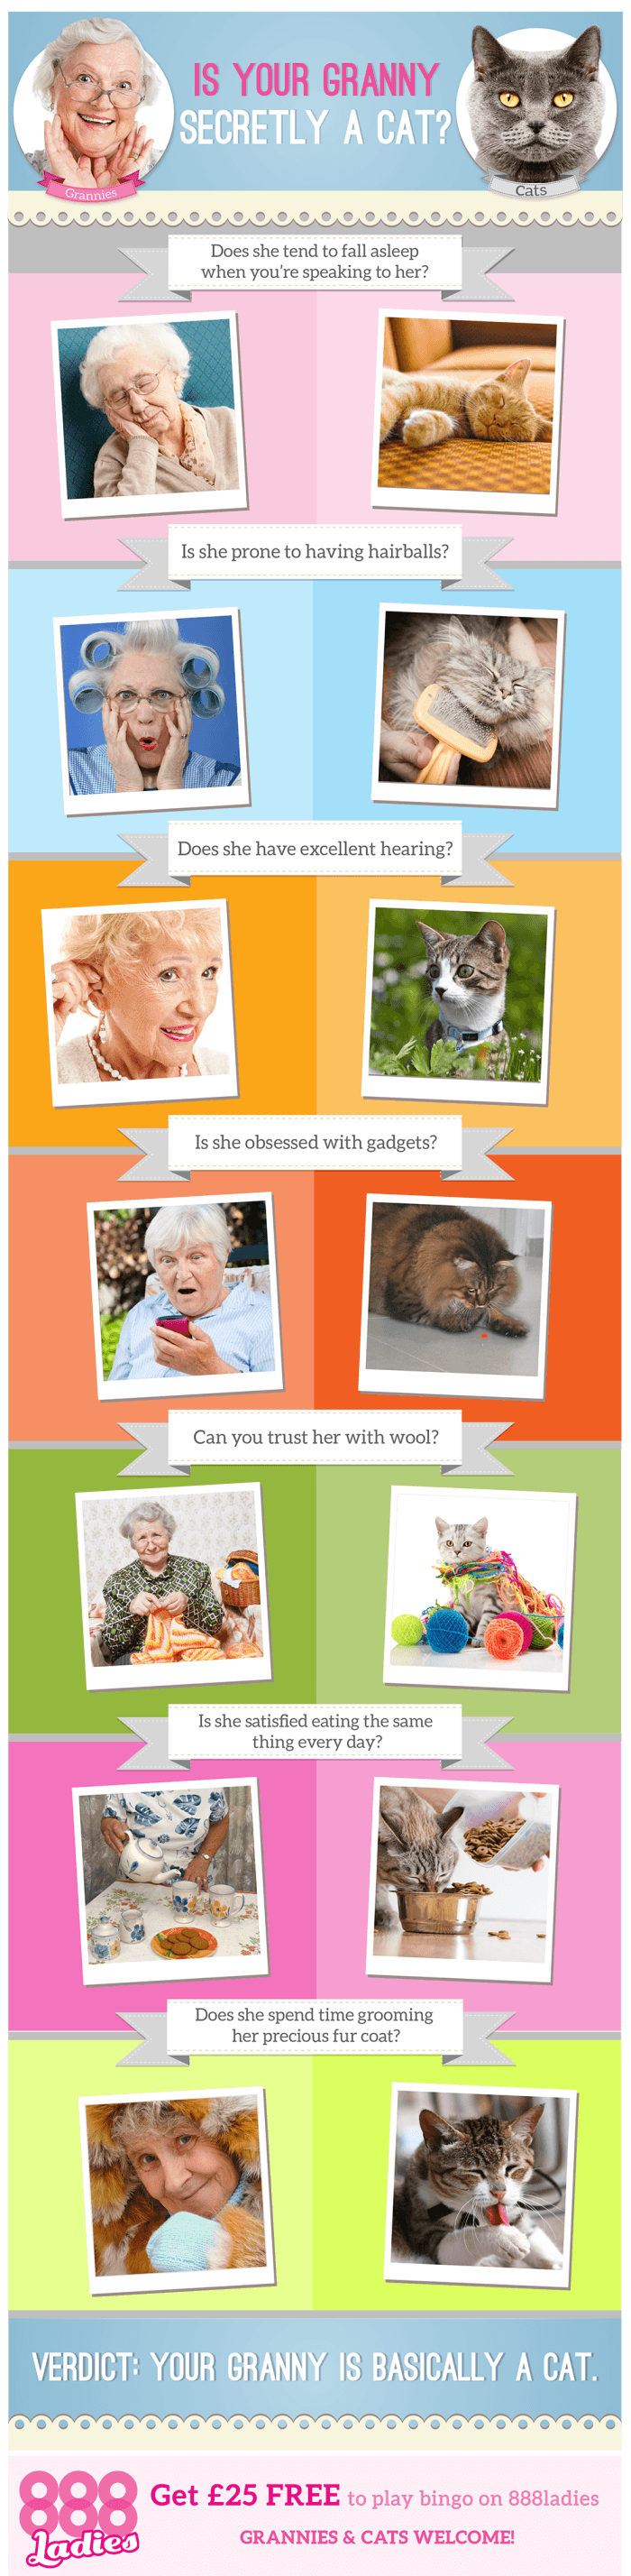 Is Your Granny Secretly a Cat?